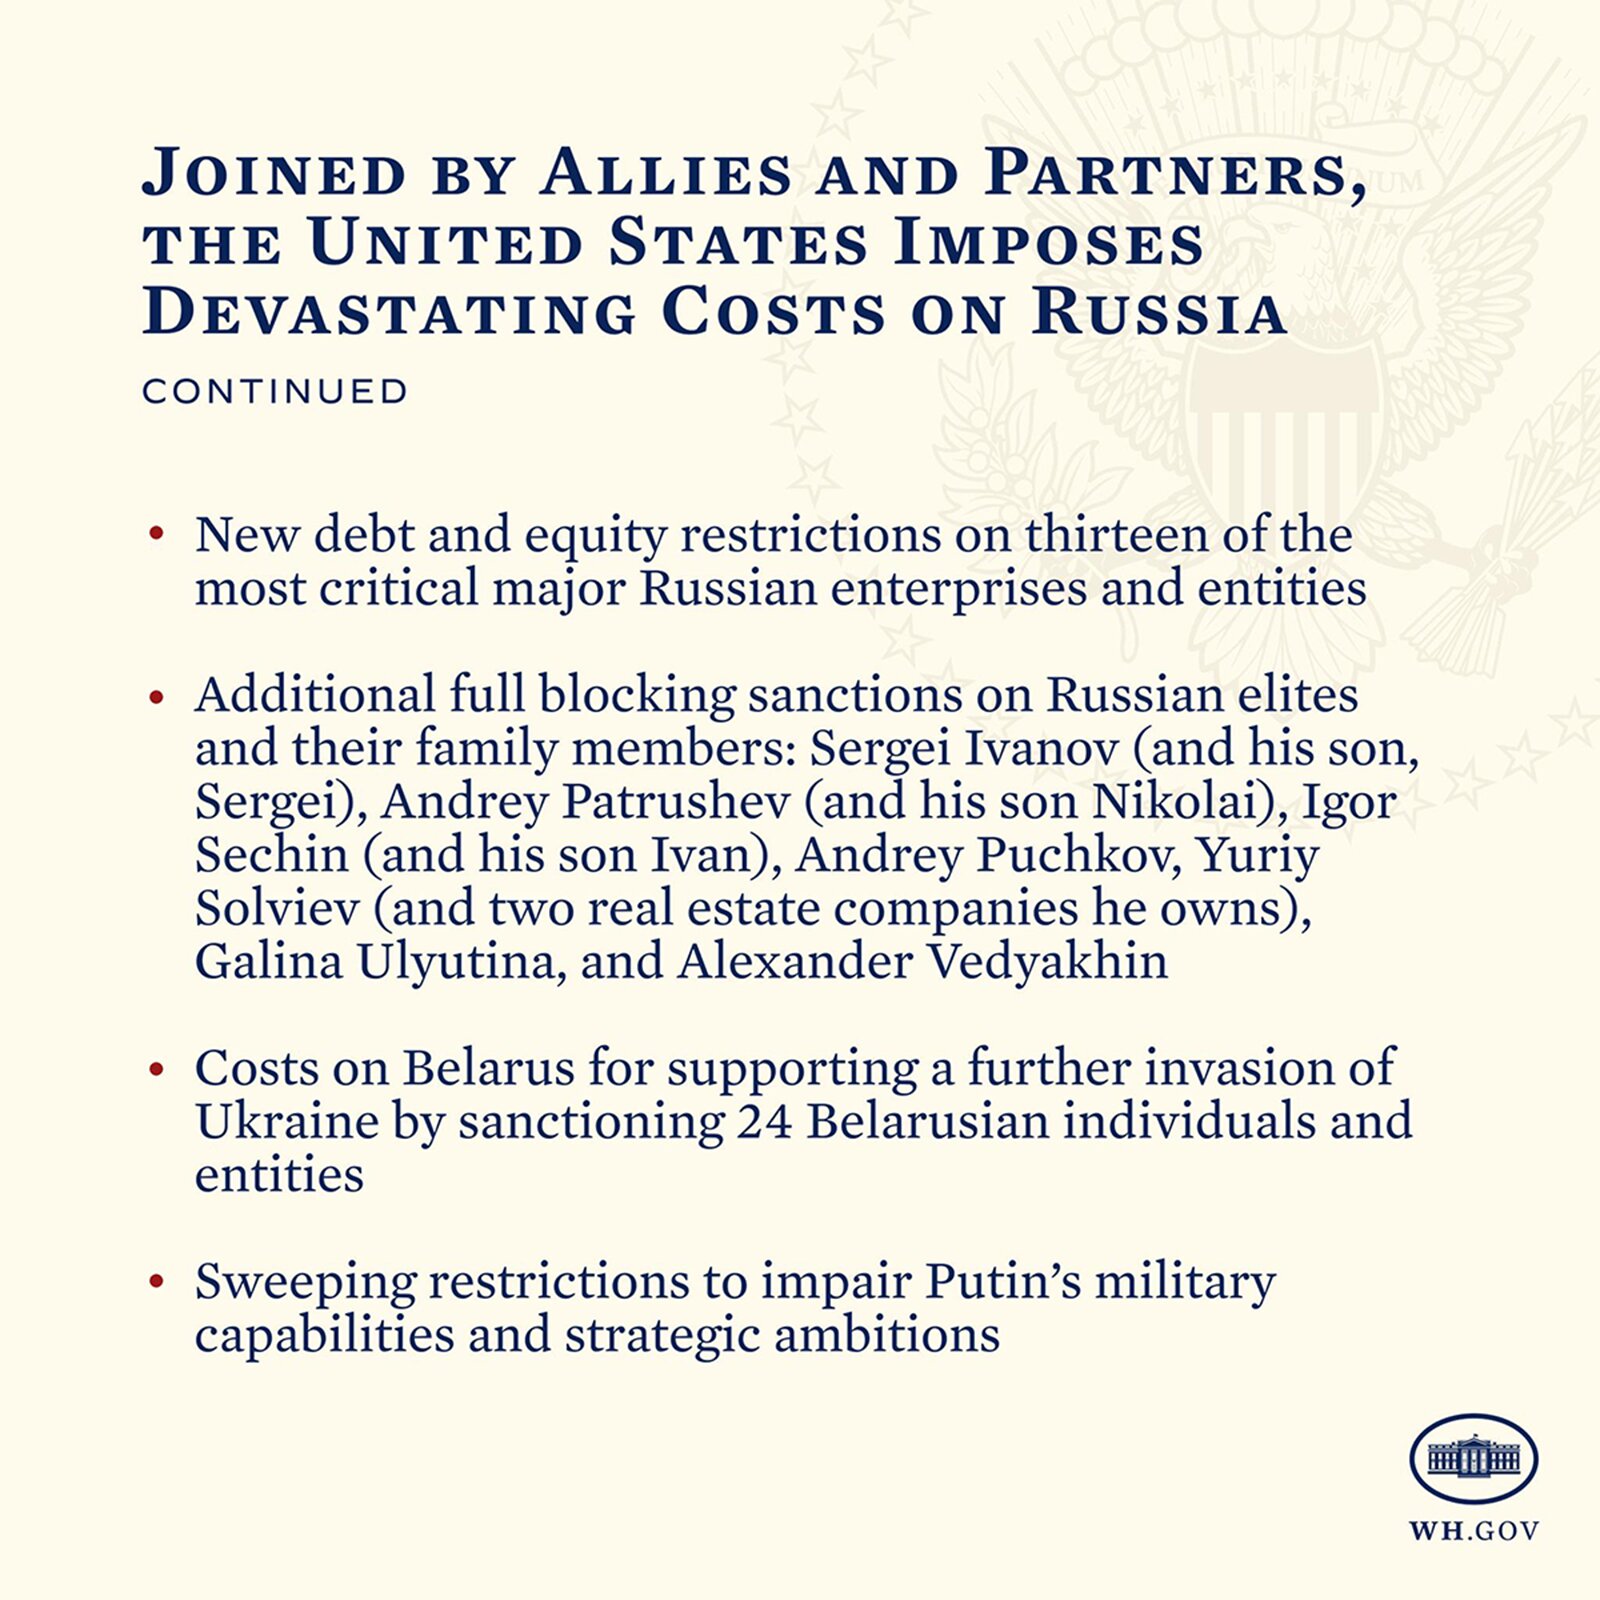 Joined-By-Allies-and-partners-the-United-States-imposes-devastating-costs-on-Russia.jpg